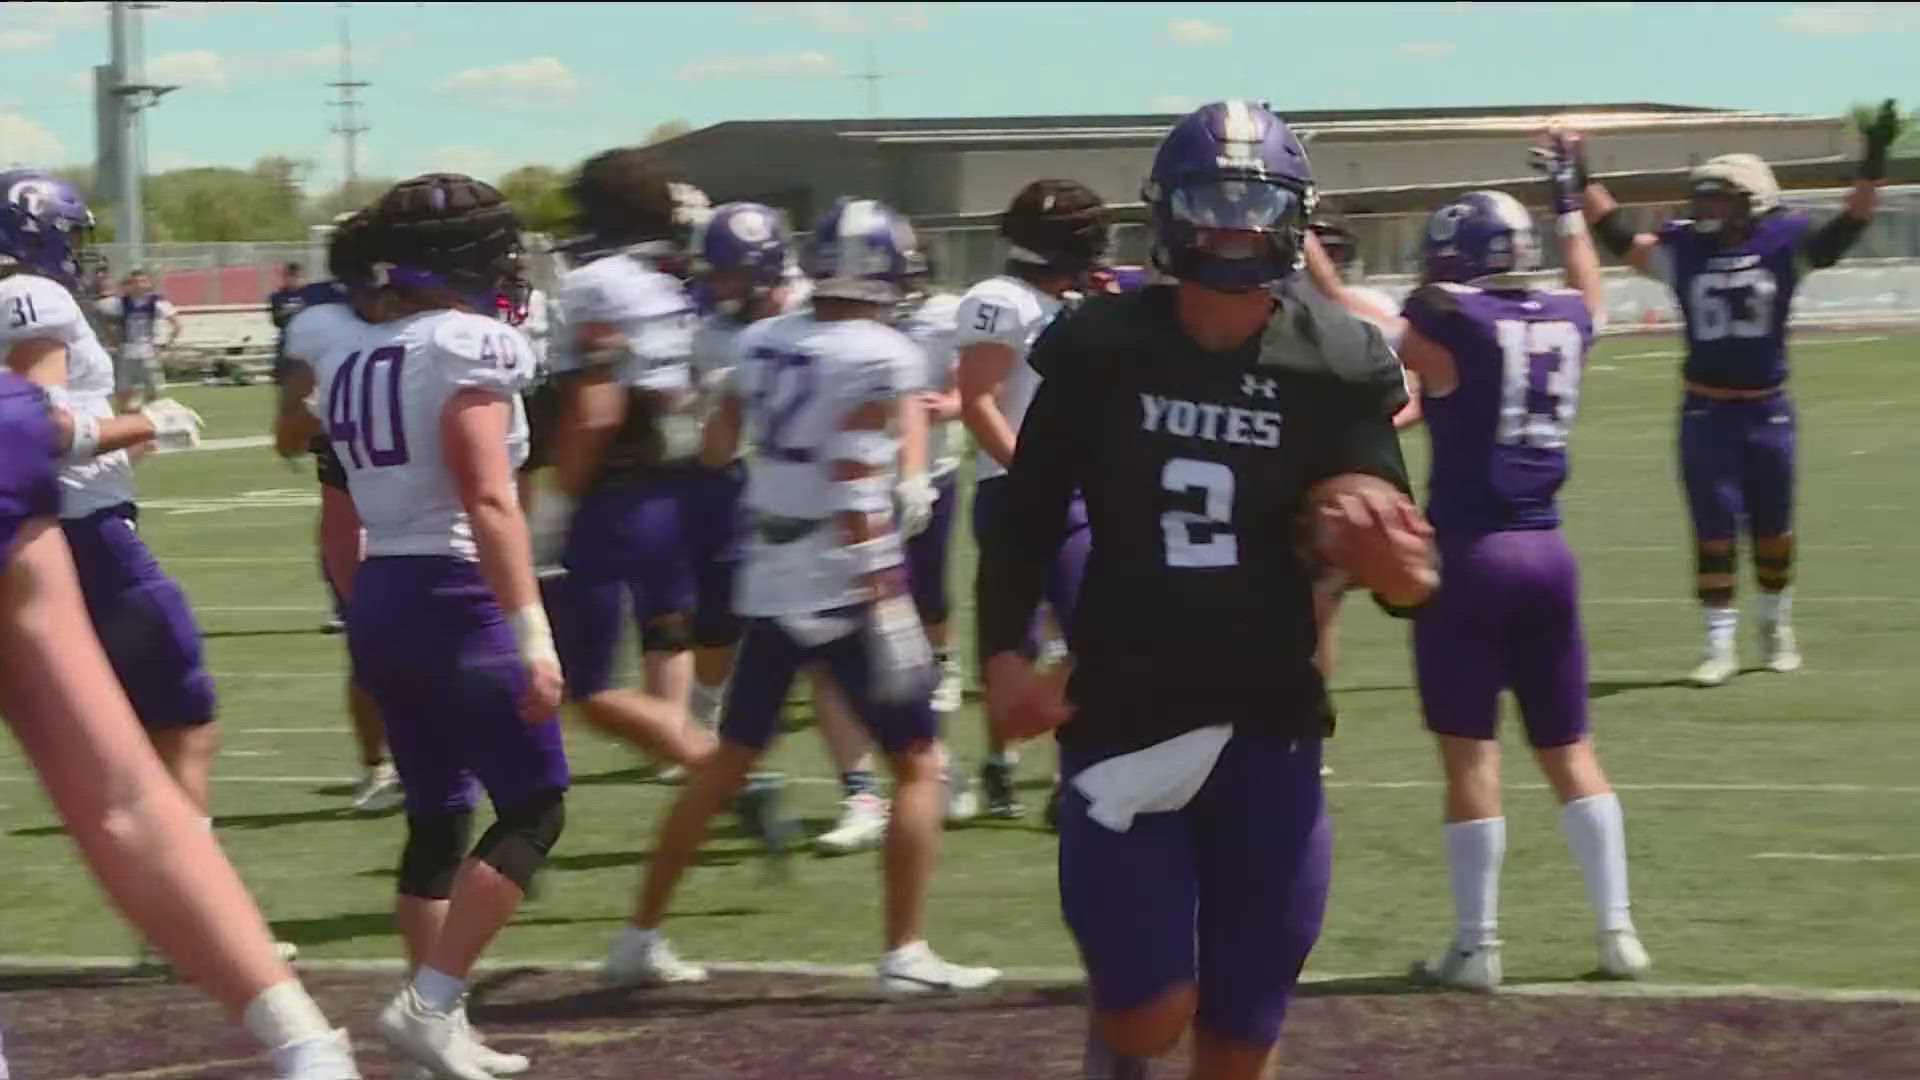 Watch extended highlights and hear from quarterback Andy Peters and head coach Mike Moroski following Saturday's spring game. The Yotes open the season on Aug. 24.